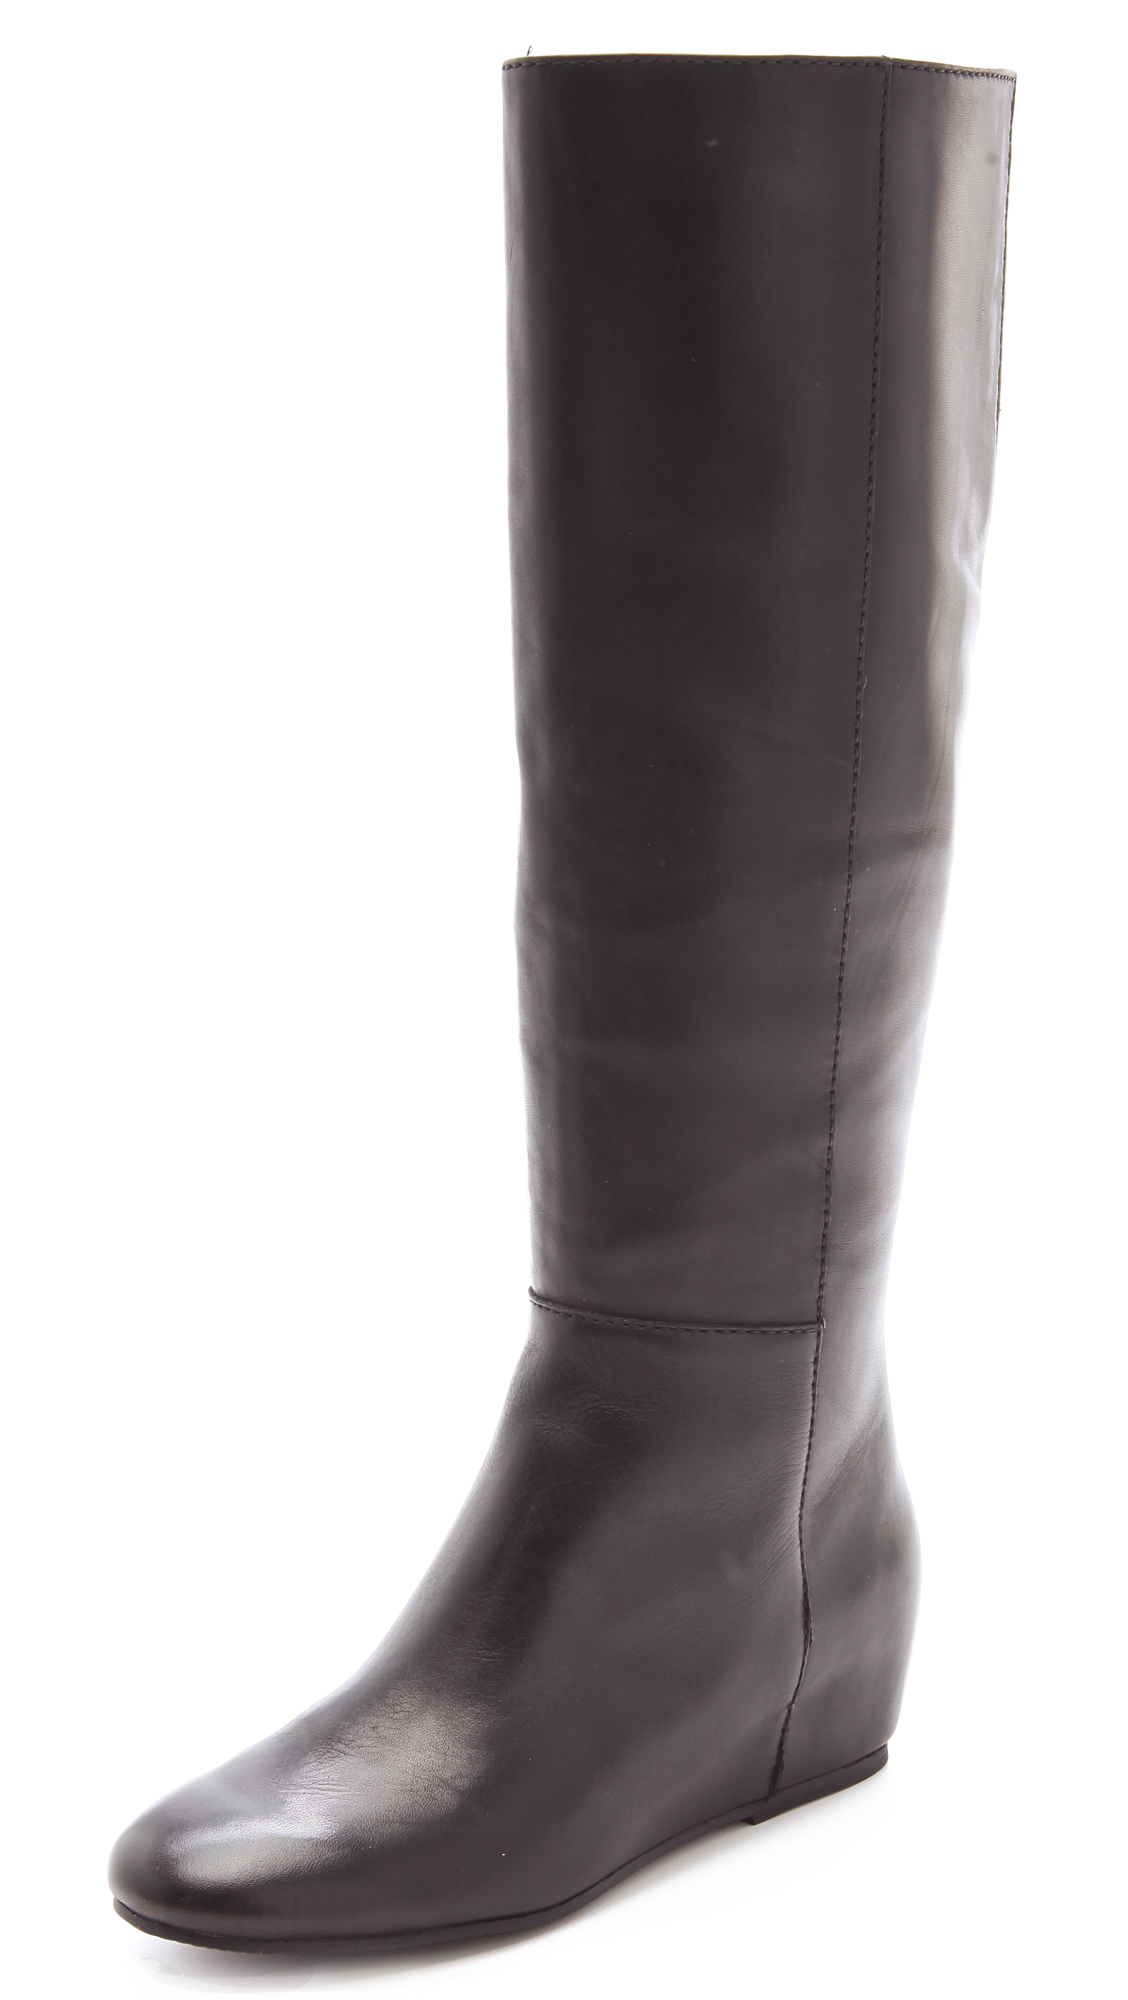 Lyst - Boutique 9 Zanny Knee High Boots in Black